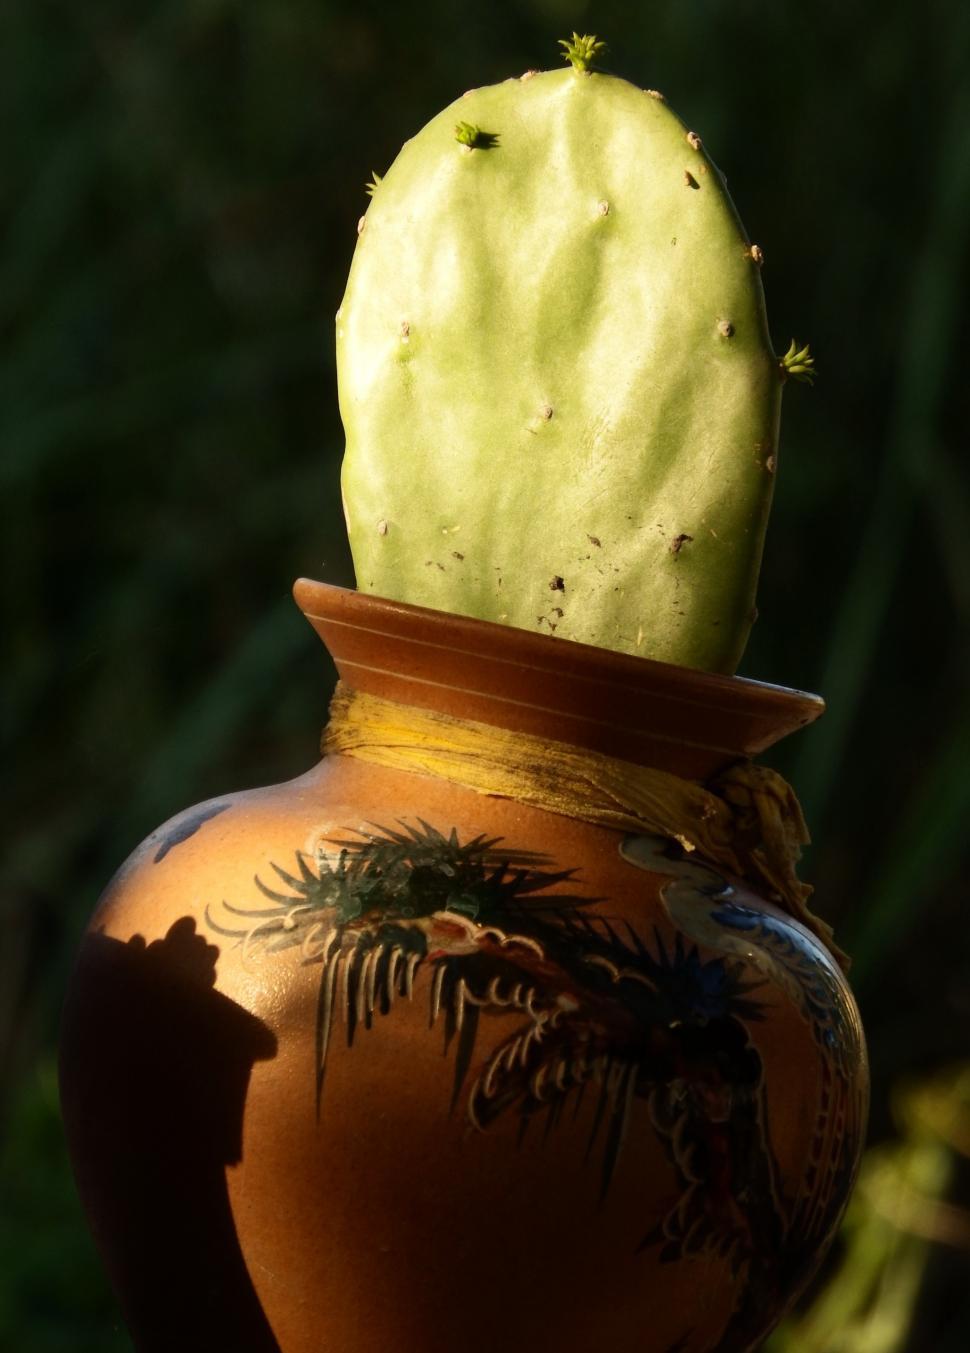 Free Image of Cactus in a Pot 